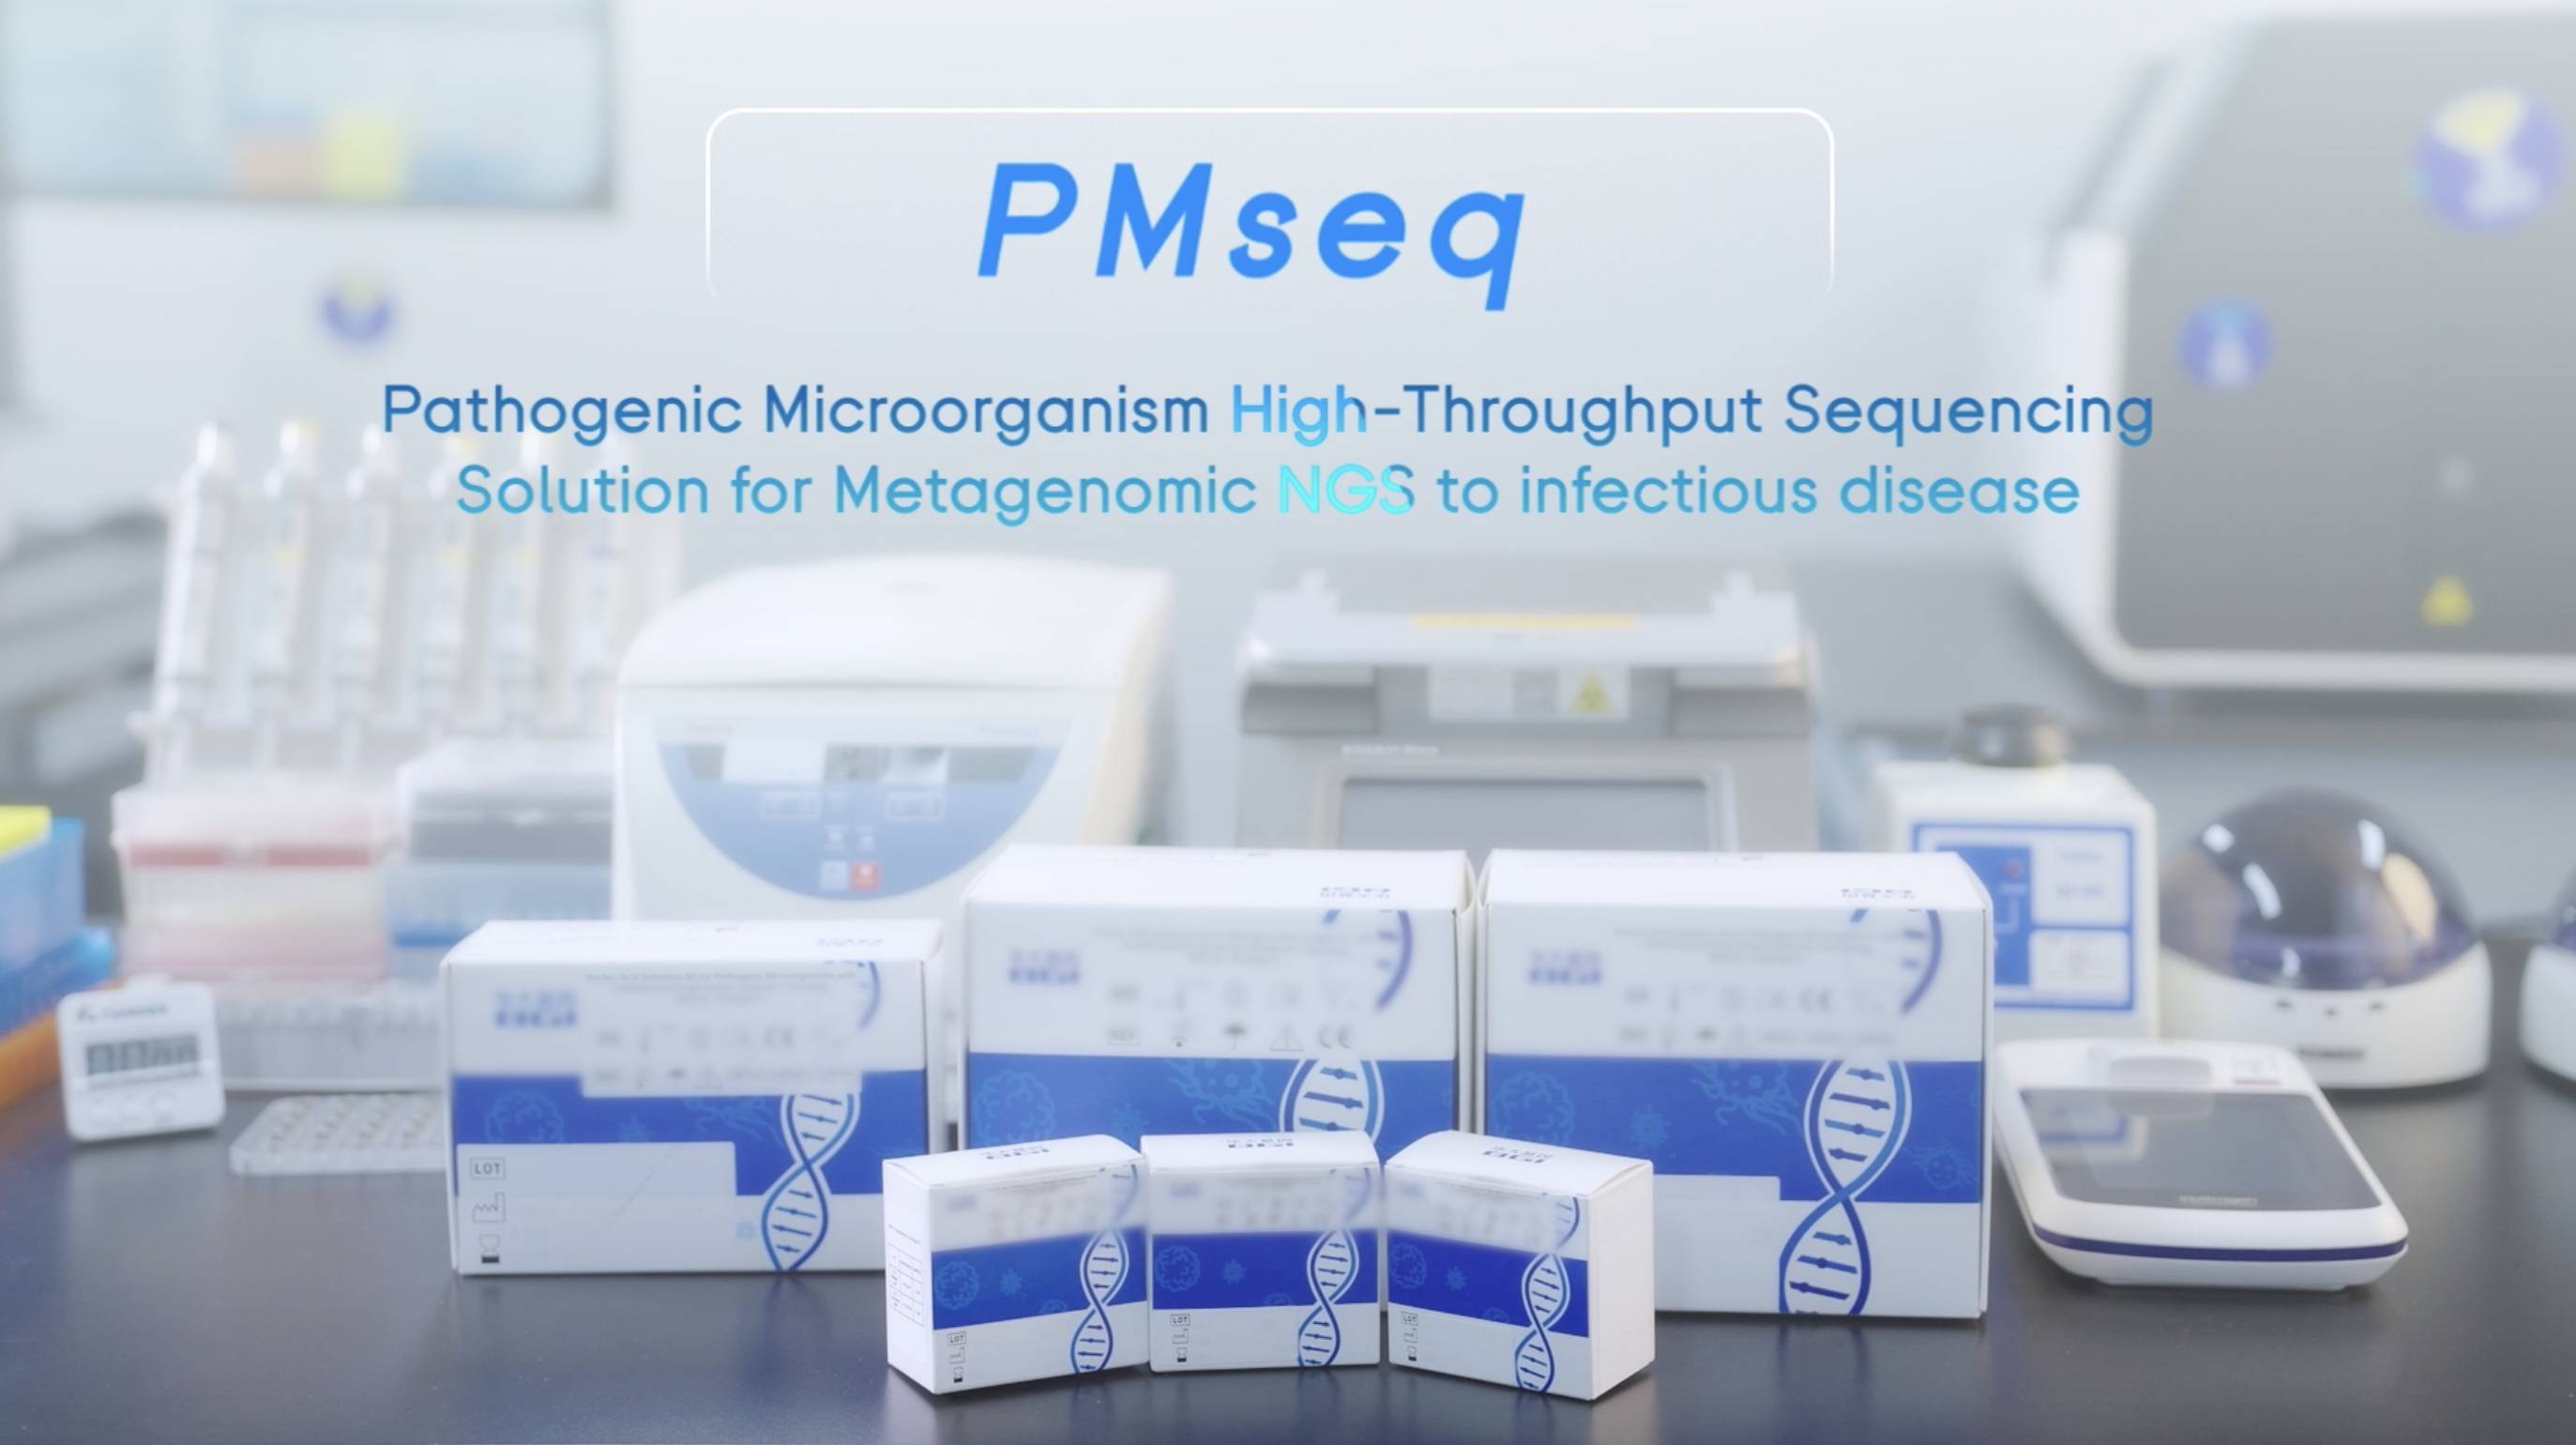 Introducing PMseq - The Pathogenic Microorganisms High-Throughput Sequencing Solution for Megagenomic NGS!